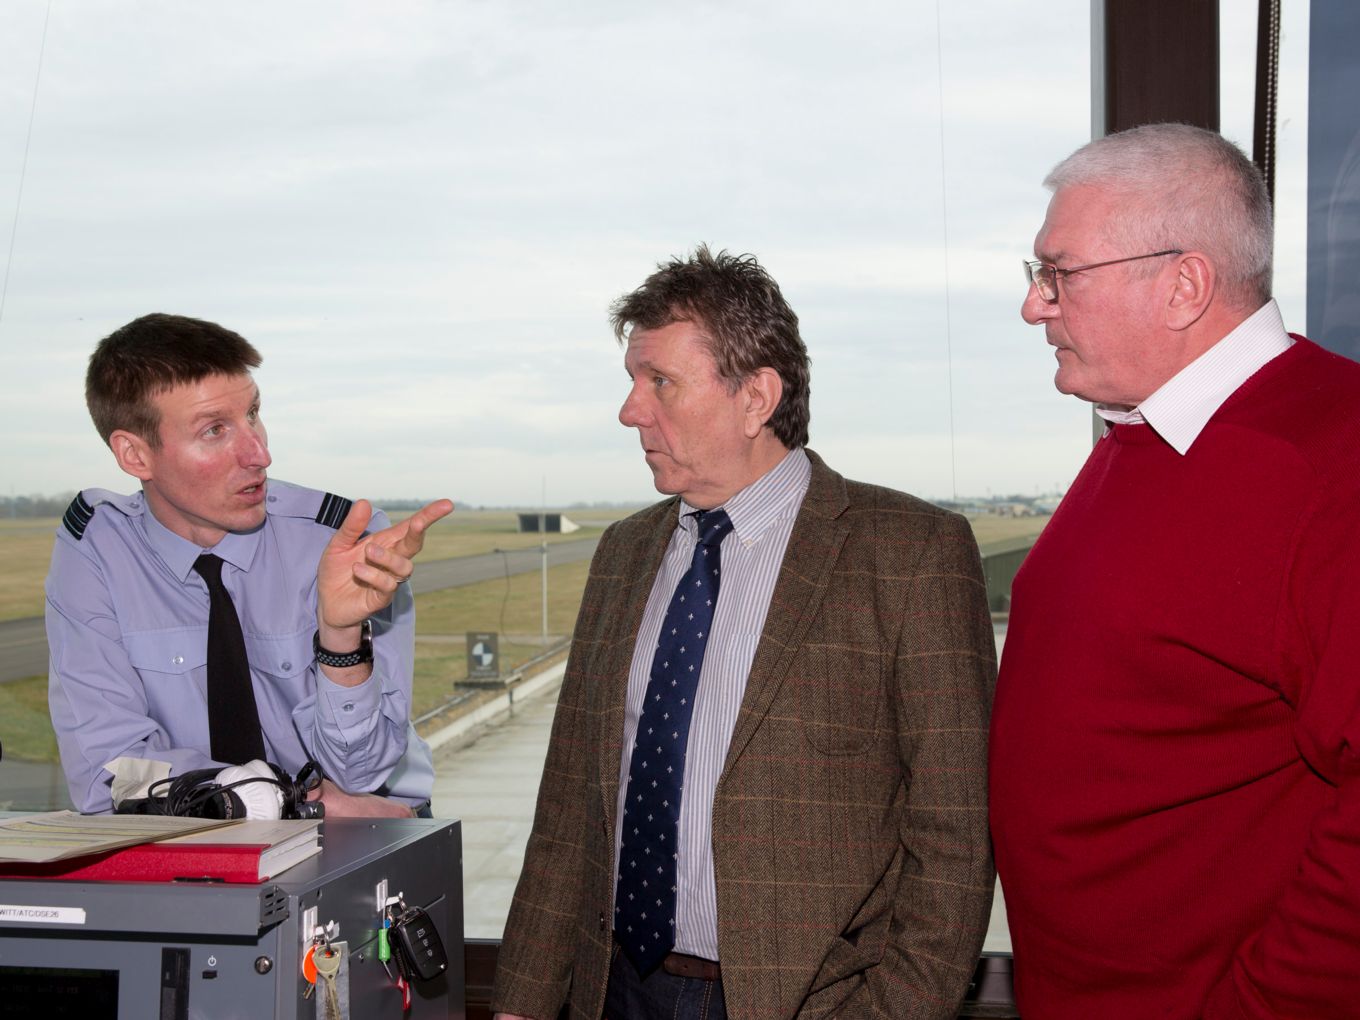 From left to right: Squadron Leader Tom Hammond, Simon Robertson and Iain Cooper in conversation at Air Traffic Control